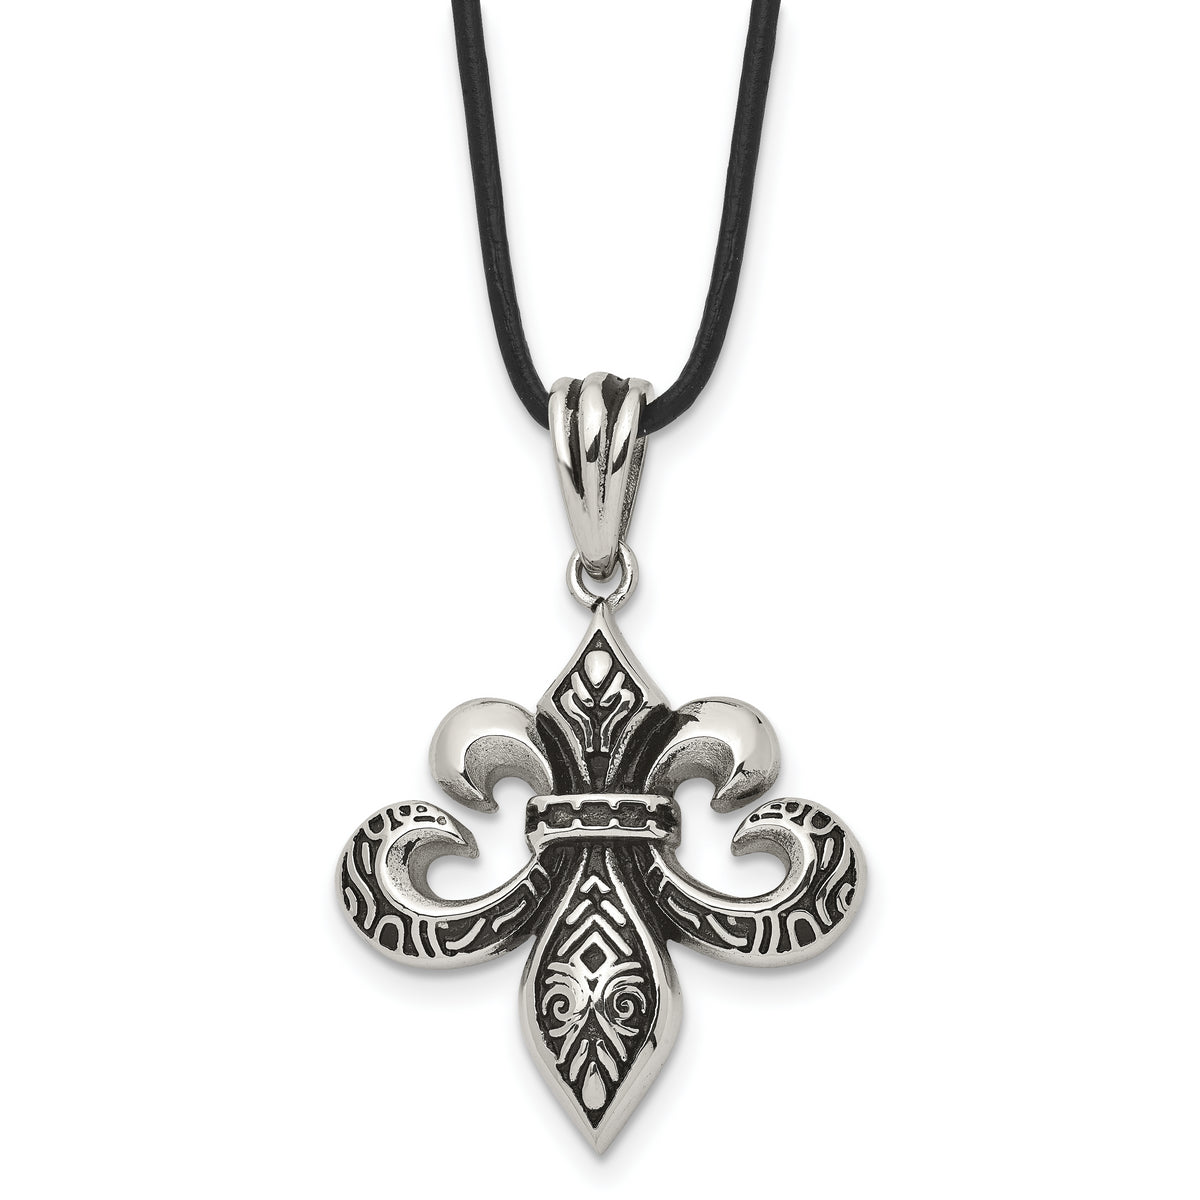 Chisel Stainless Steel Antiqued and Polished Fleur de lis Pendant on a 20 inch Leather Cord Necklace